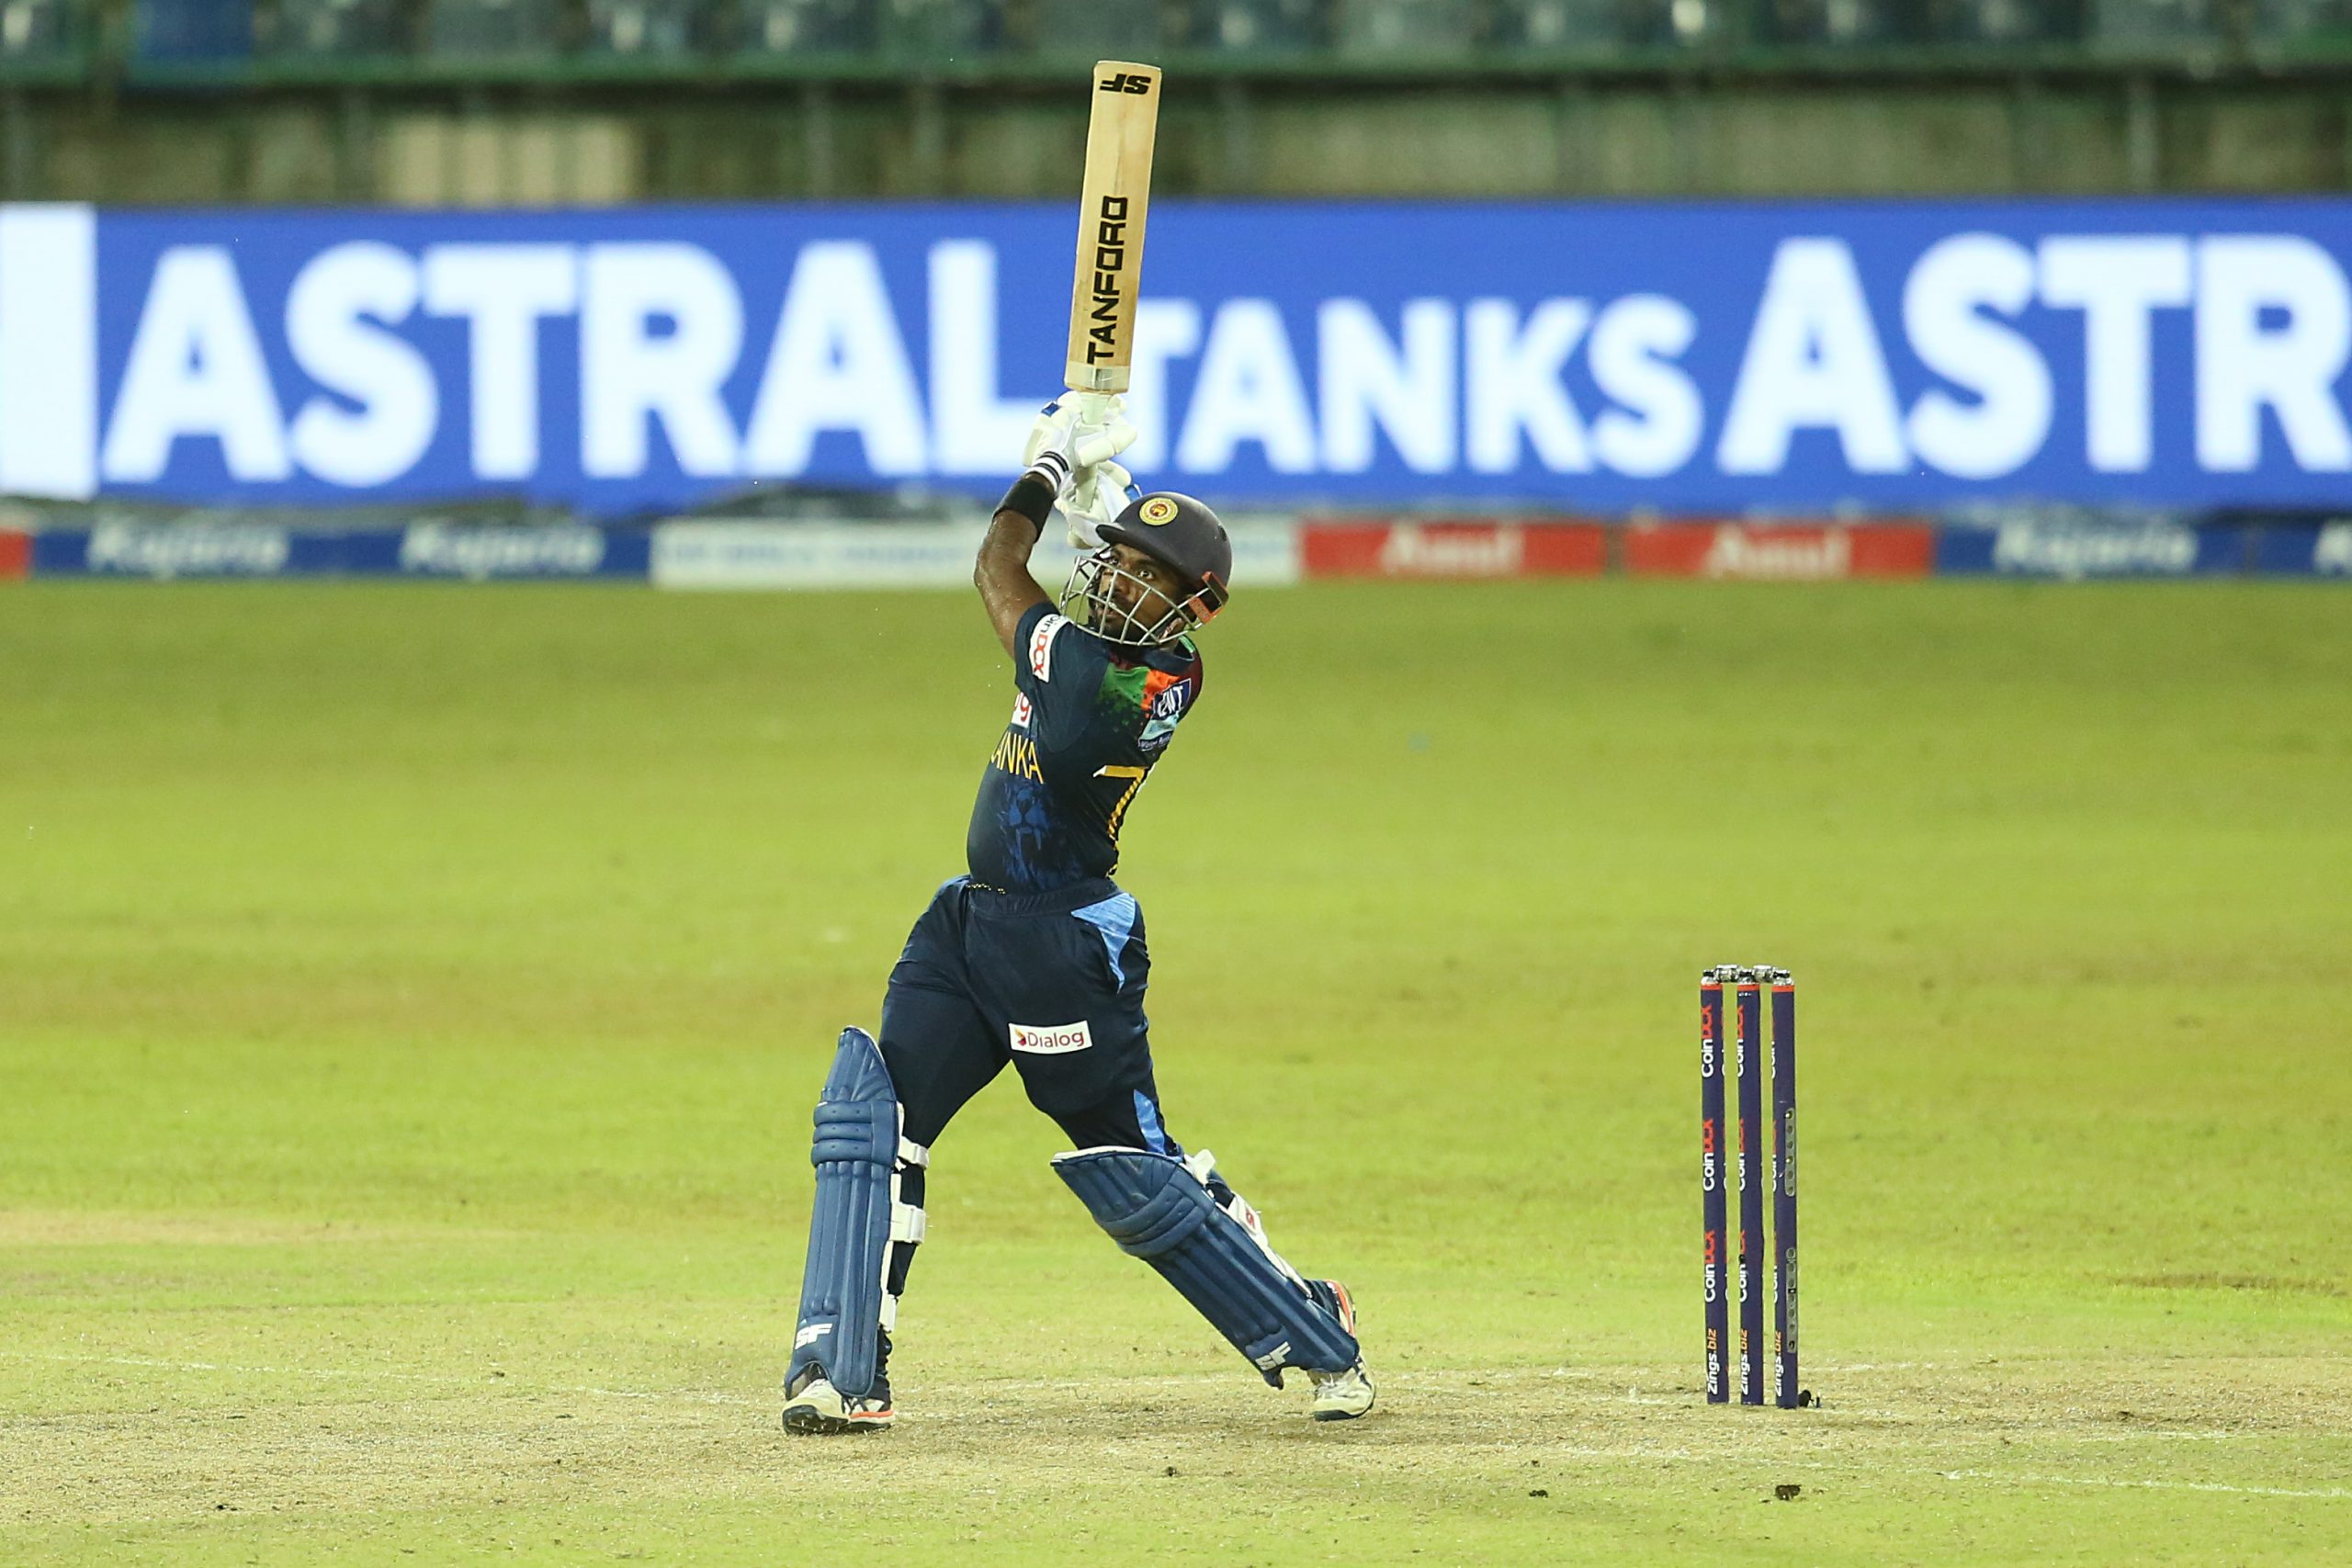 Charith Asalanka has signaled his arrival as a potential young batsman for the future